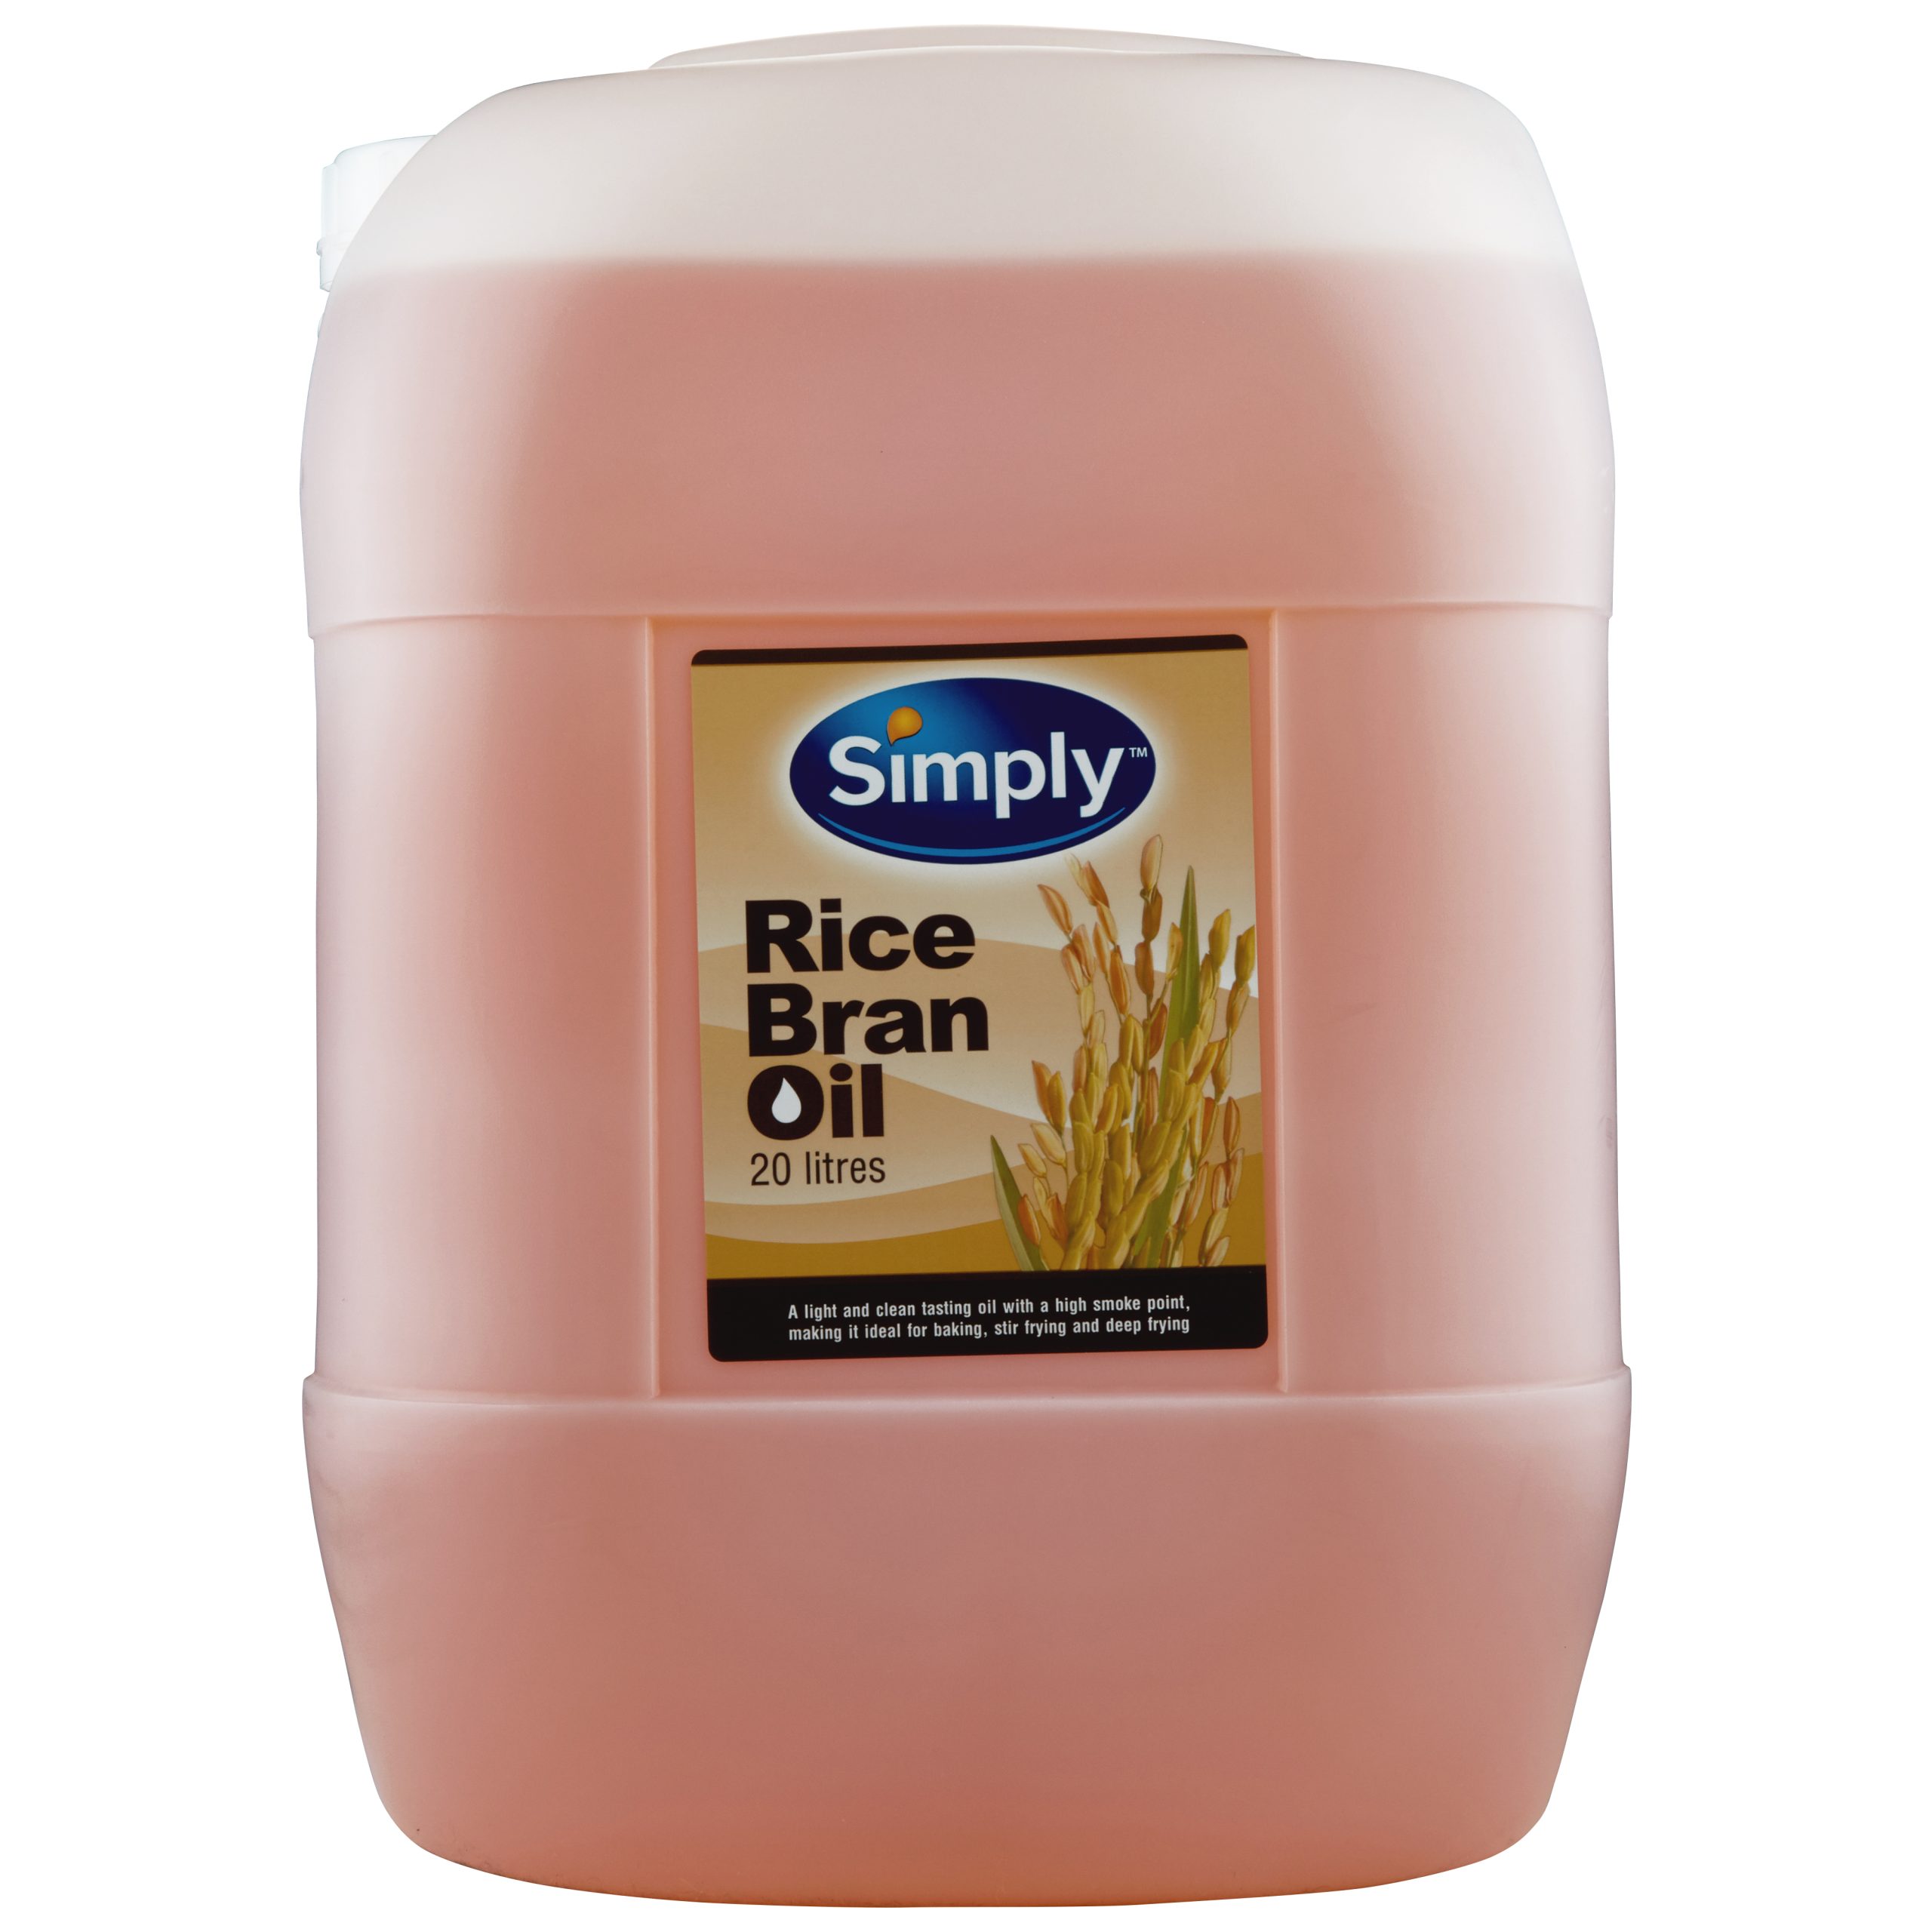 Simply Rice Bran Oil Jerry Can 20 l product photo